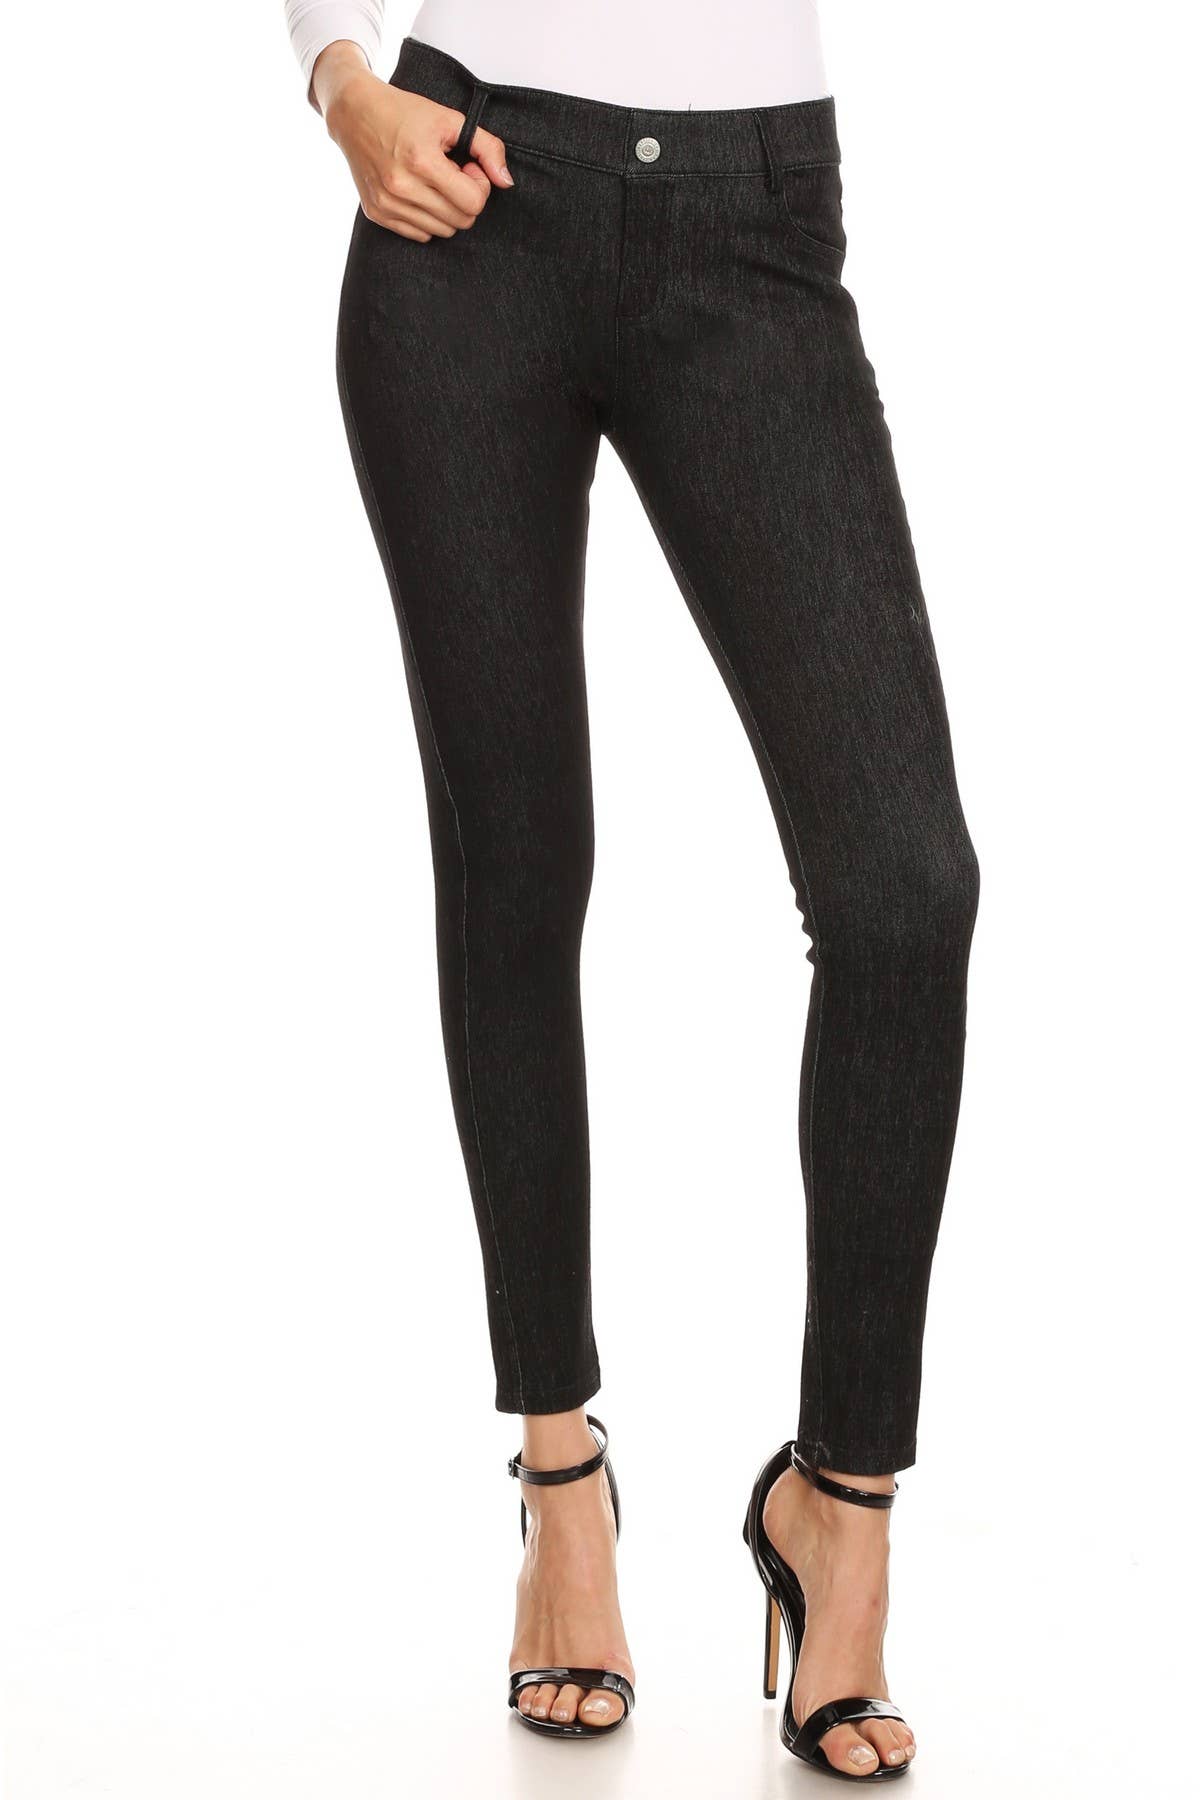 Combo Of 3 Checked Jeggings at Rs 655.00, Women Jeggings, Treggings,  Jeggings Pants, Skinny Jeggings, महिलाओं की जेगिंग - SVB Ventures,  Bengaluru